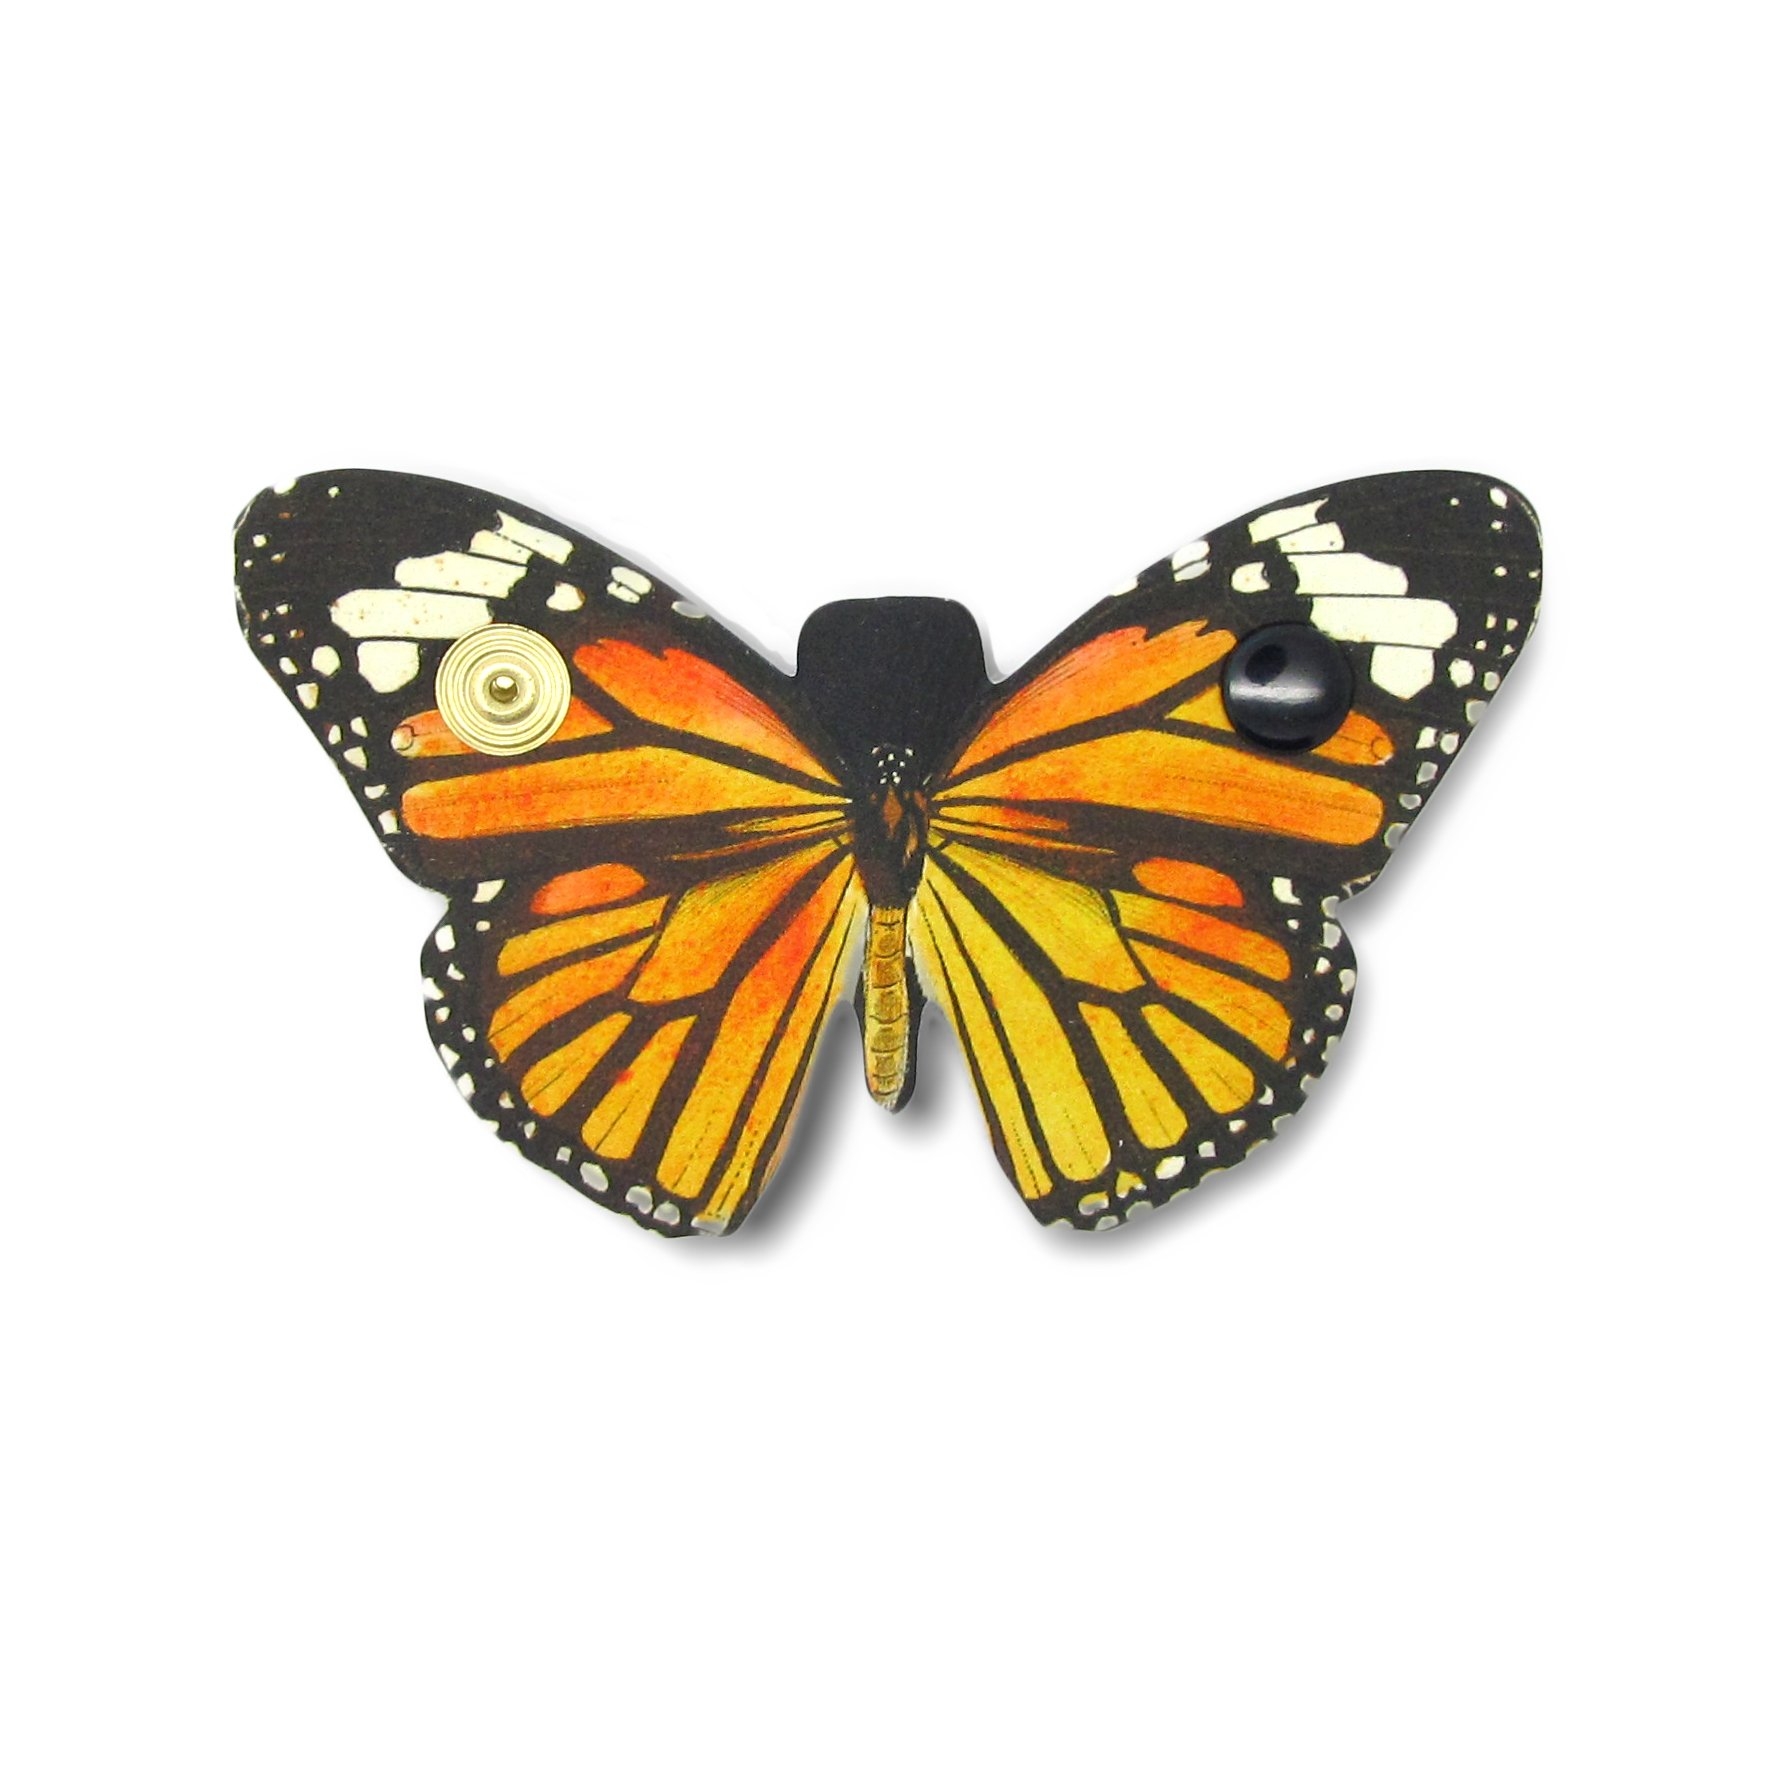 Leather Cable Tidy / Headphone Holder: Botanical Butterflies – Orange and Black / Single Cable Tidy